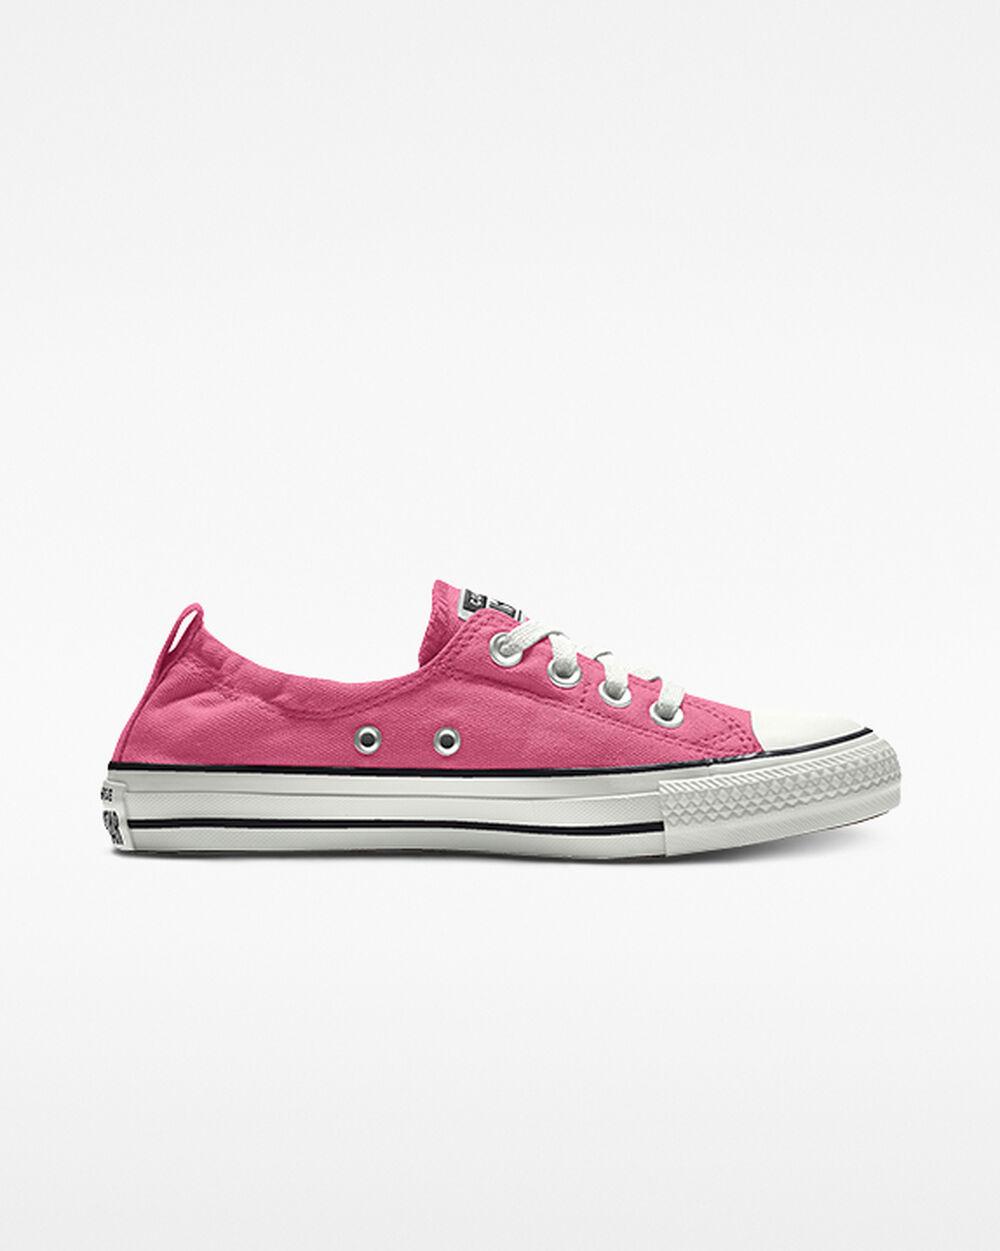 Converse Custom Chuck Taylor All Star Shoreline Slip By You in Pink | Lyst